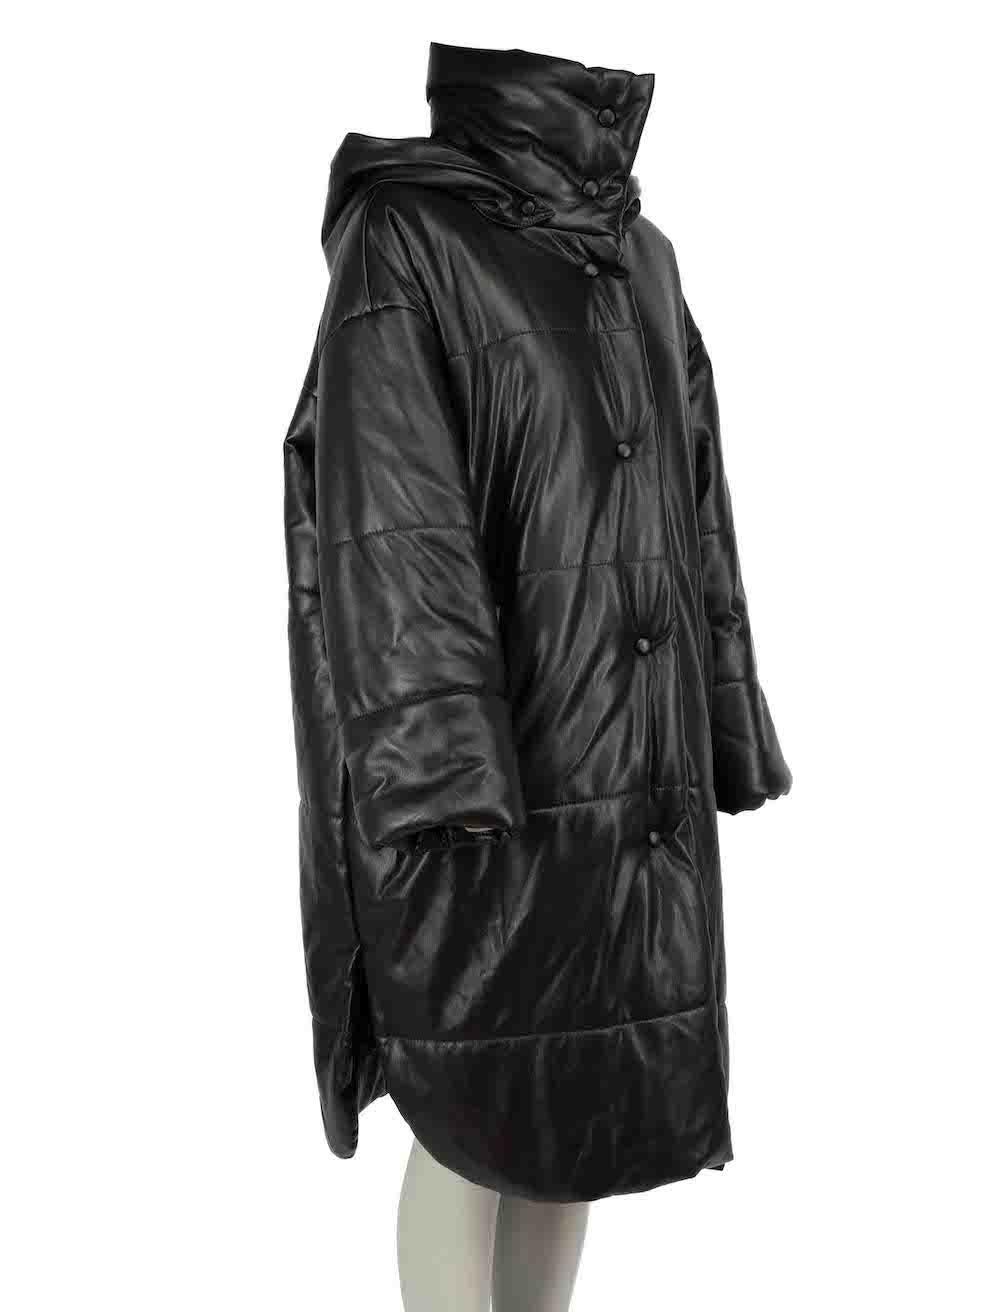 CONDITION is Never worn. No visible wear to coat is evident on this new NANUSHKA designer resale item.
 
Details
Black
Faux leather
Puffet coat
Oversized fit
Detachable hood
Button up fastening
2x Side pockets
 
Made in Hungary
 
Composition
65%